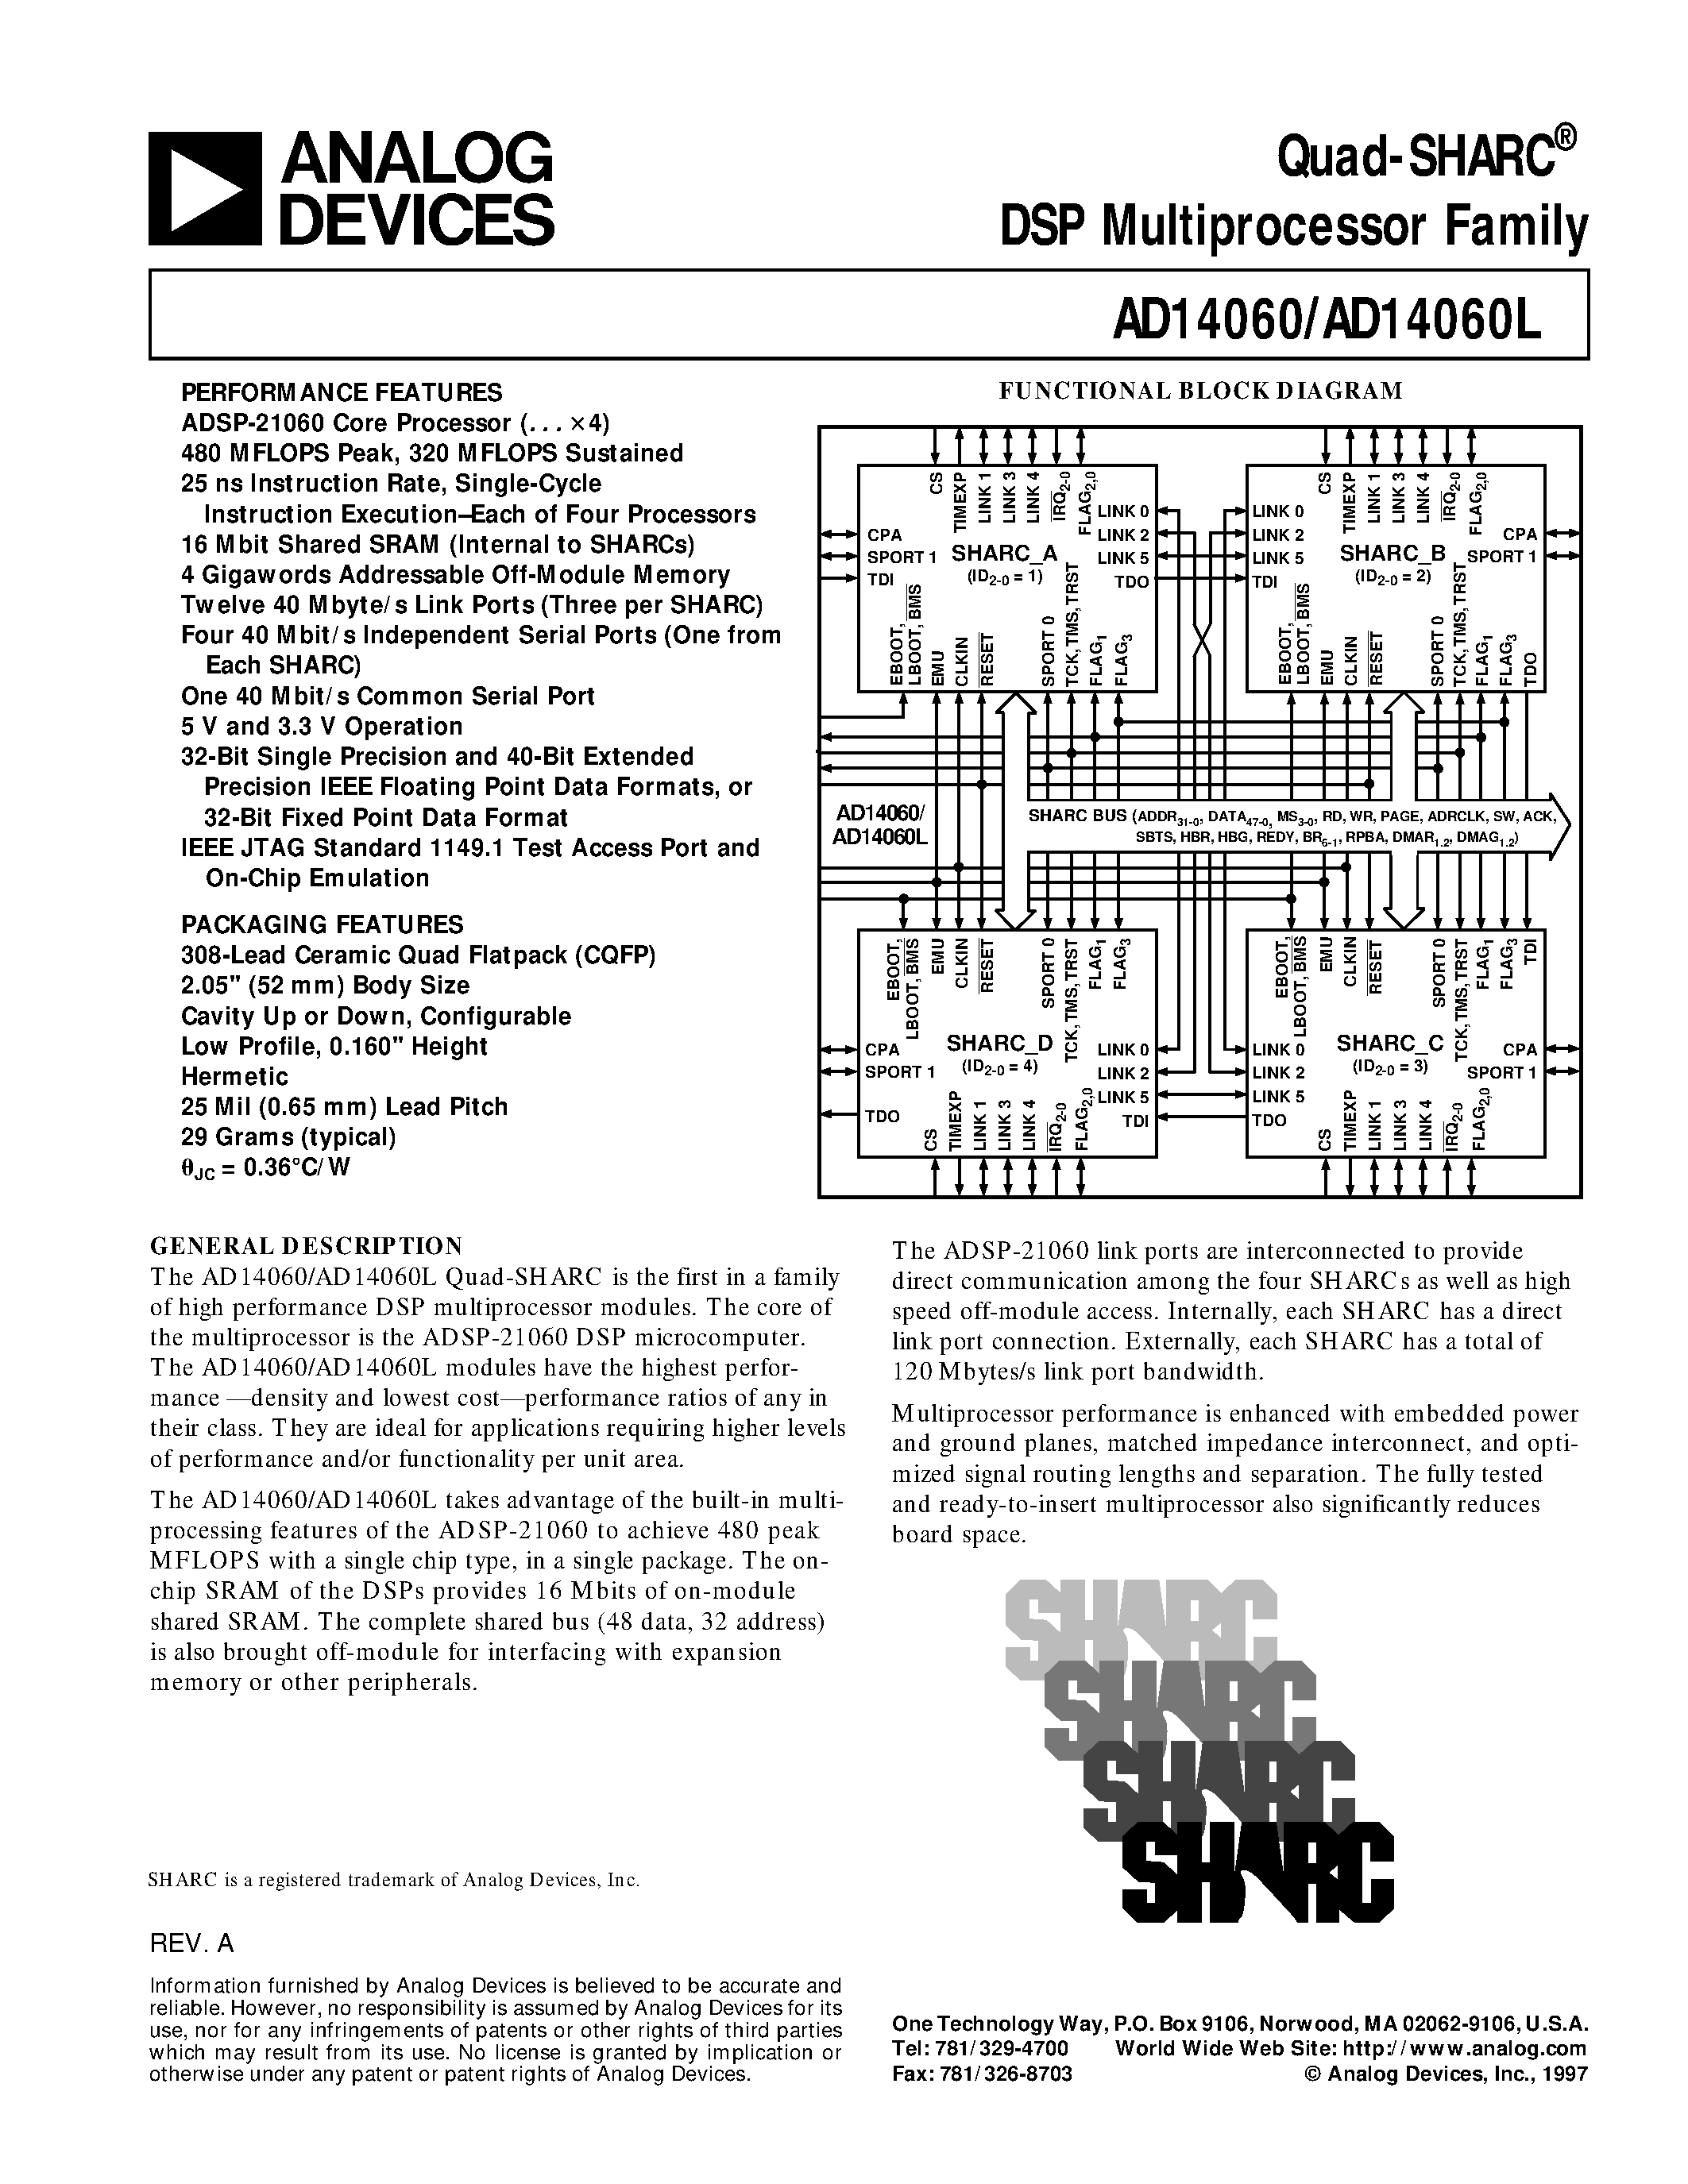 Datasheet AD14060L - Quad-SHARC DSP Multiprocessor Family page 1